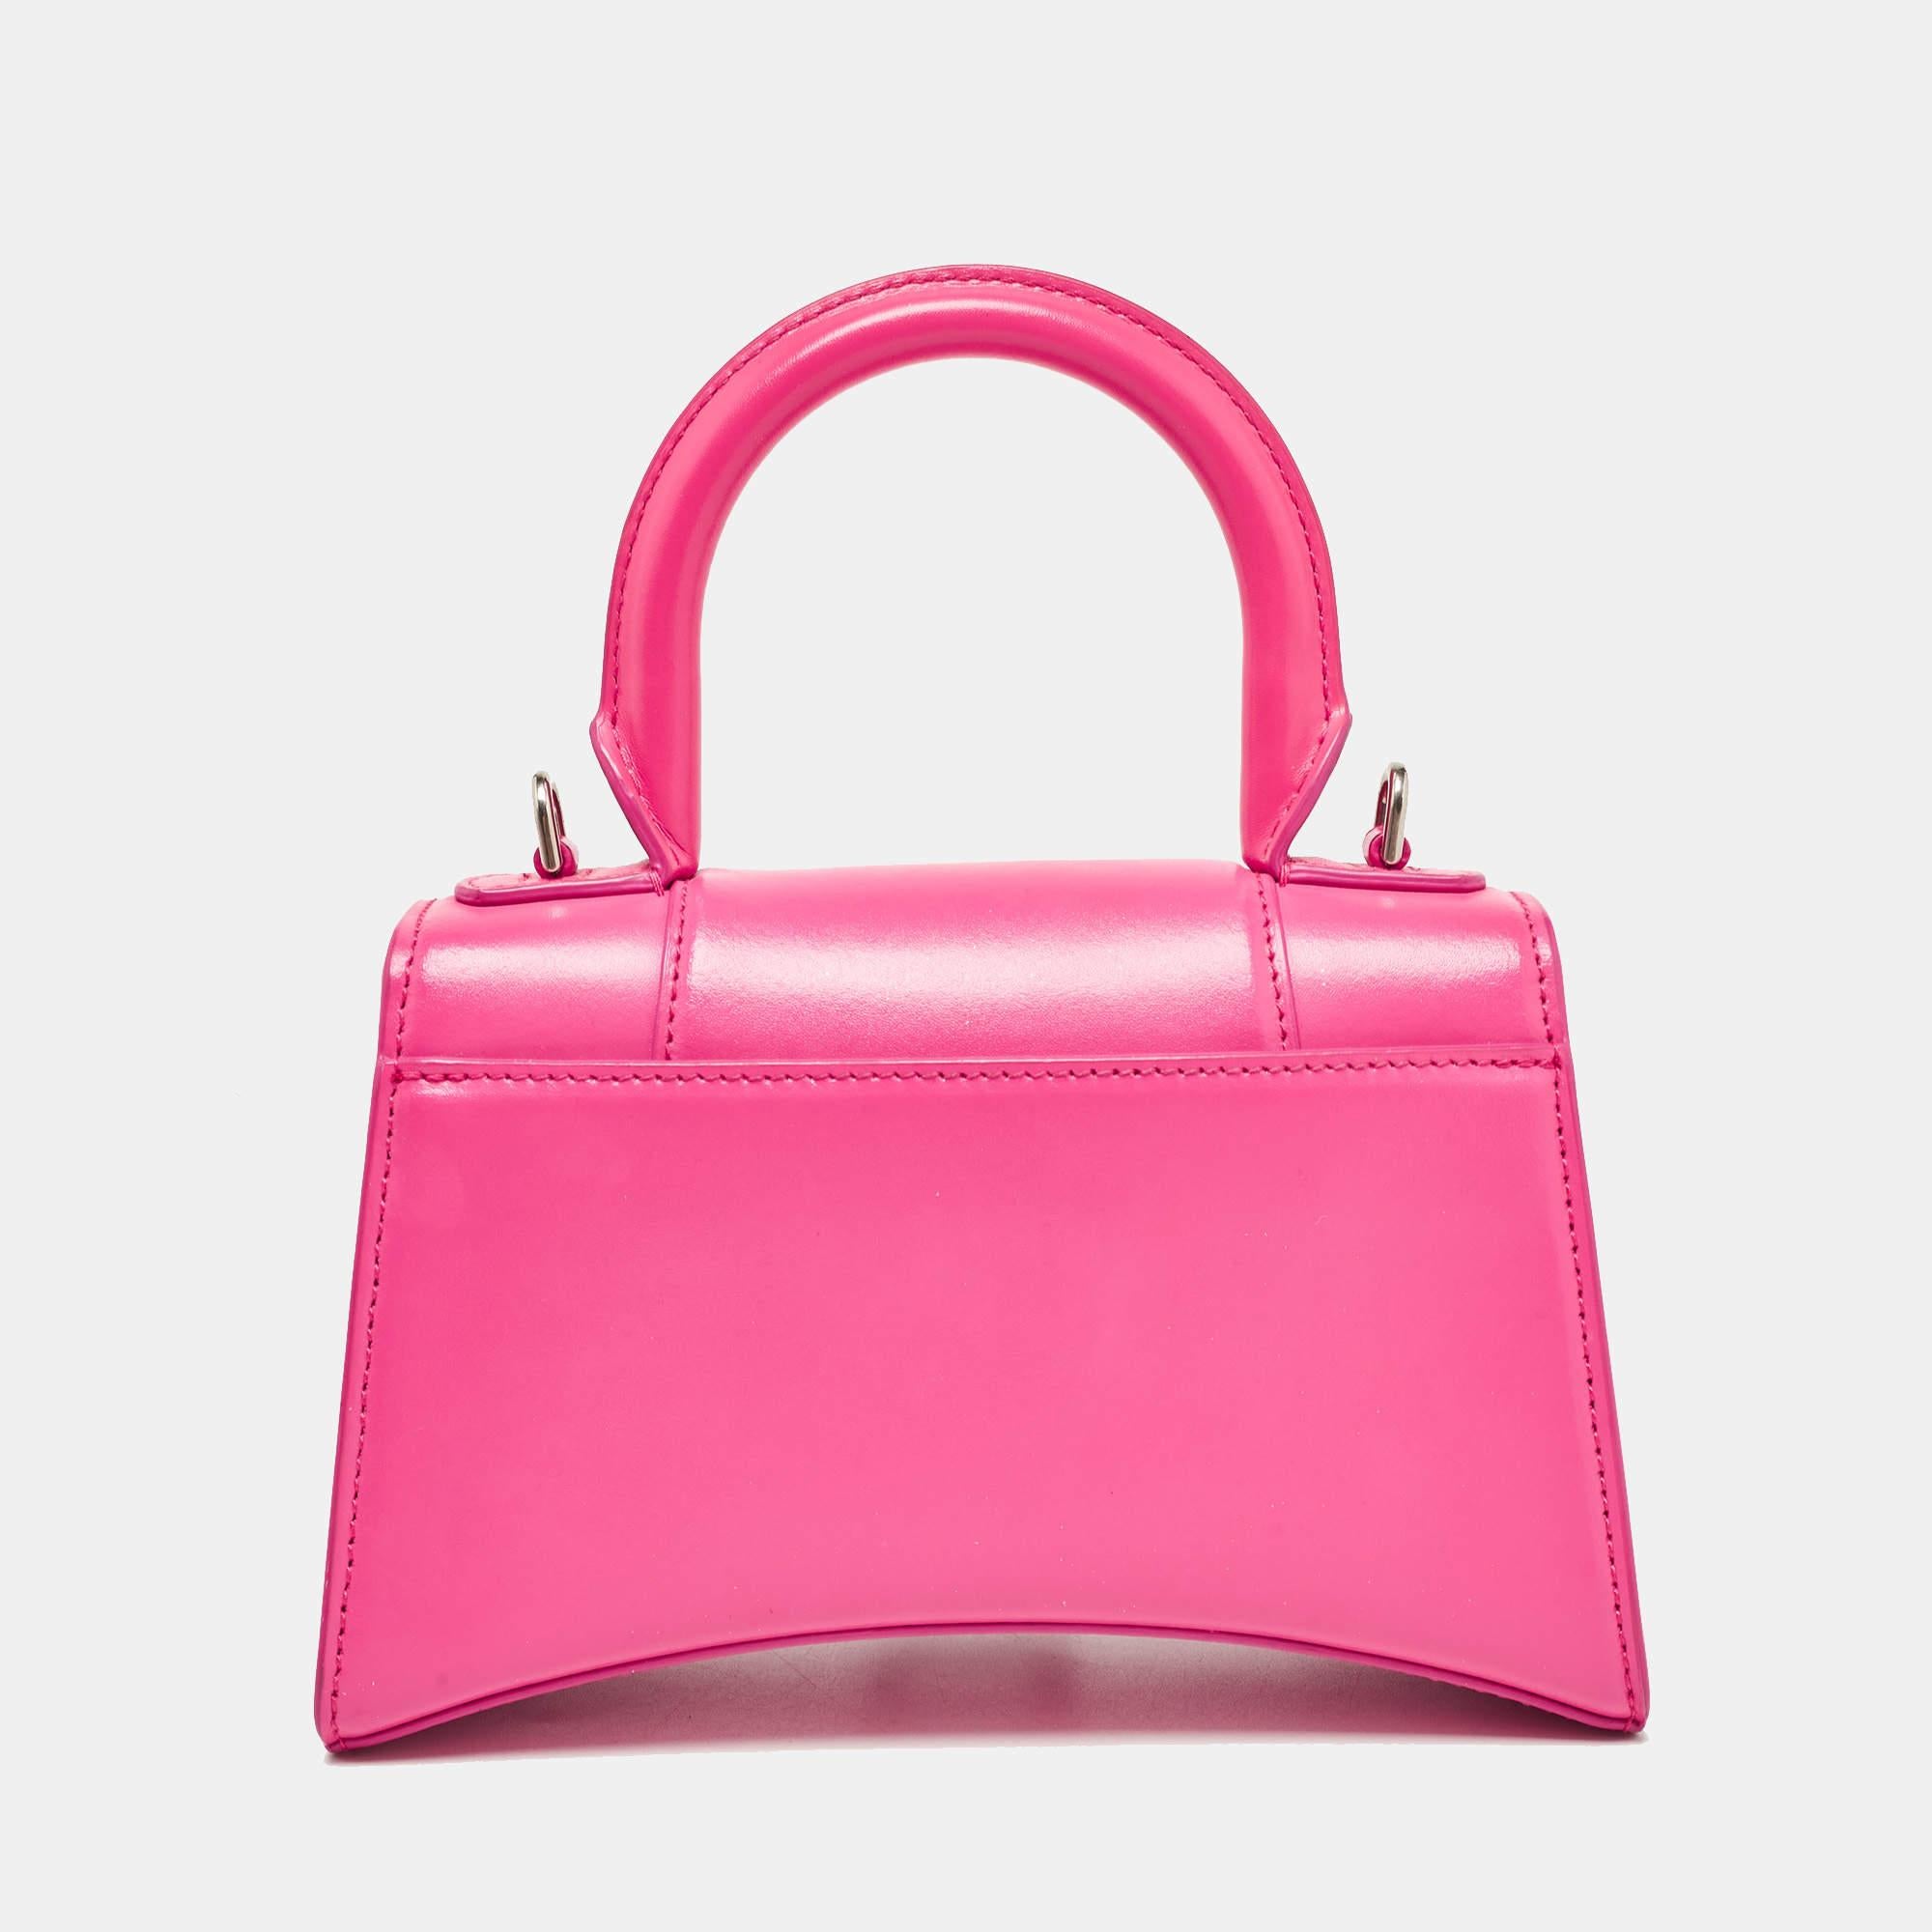 Balenciaga's Hourglass bag is fast becoming a must-have bag. Crafted using leather, the XS Hourglass top handle bag is styled with a flap that has the iconic B logo. The bag has a lined interior, a shapely top handle, and a shoulder